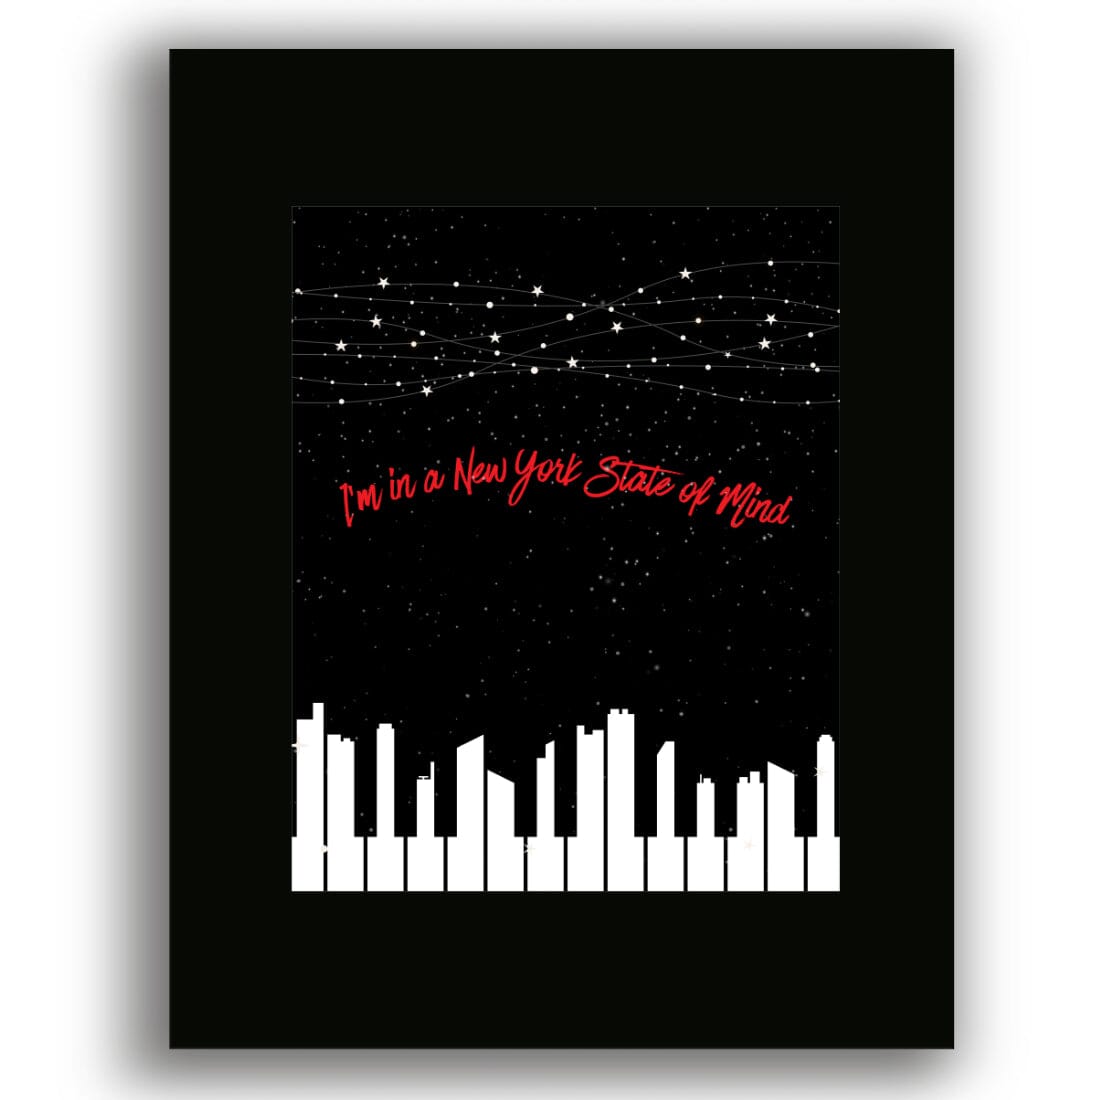 New York State of Mind by Billy Joel - Song Lyrics Art Print Song Lyrics Art Song Lyrics Art 8x10 Black Matted Print 